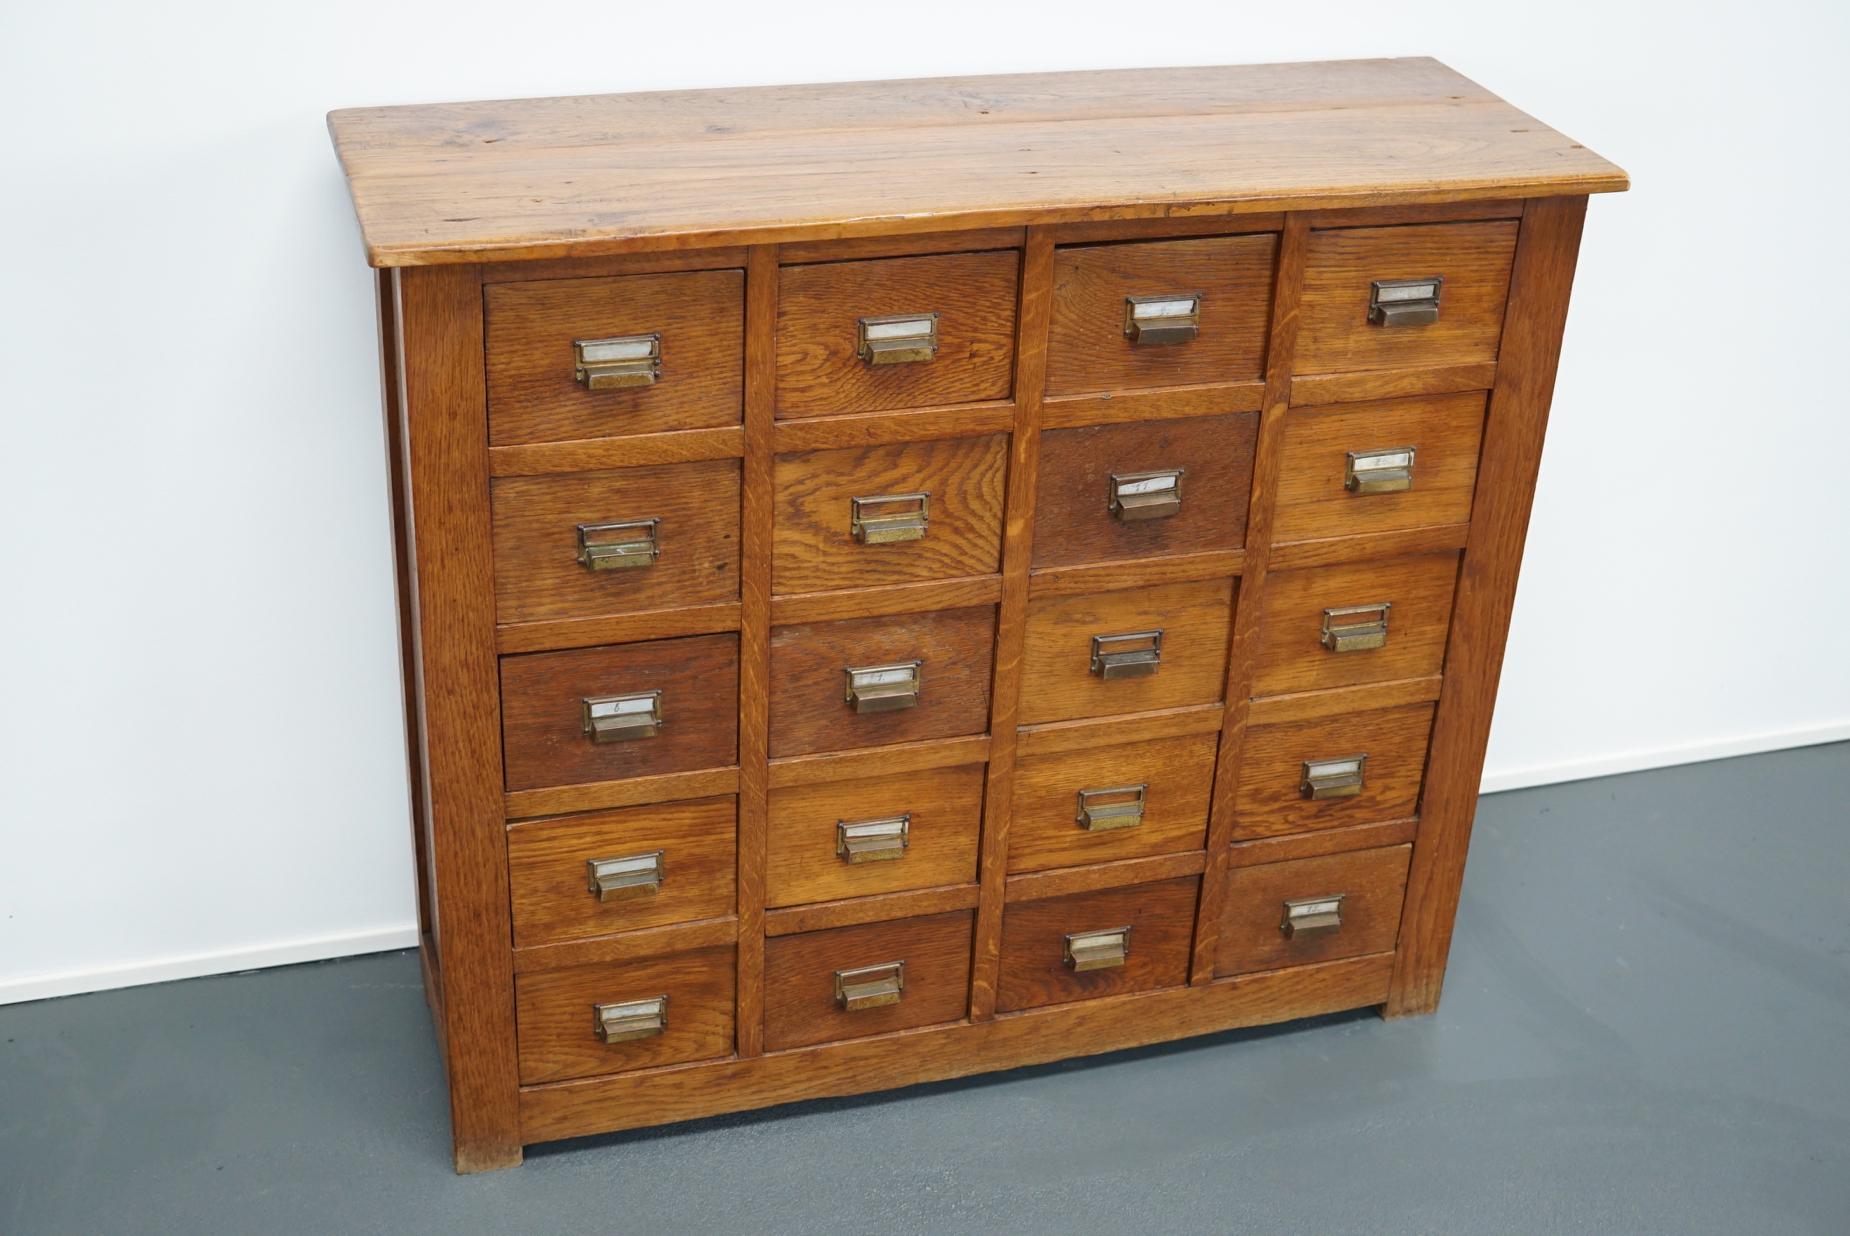 This apothecary cabinet with drawers was designed and made circa 1930 in France. The piece is made from oak and features 20 drawers with brass hardware. The inside drawer measurements are 24.2 x 15.7 x 10 cm.
 